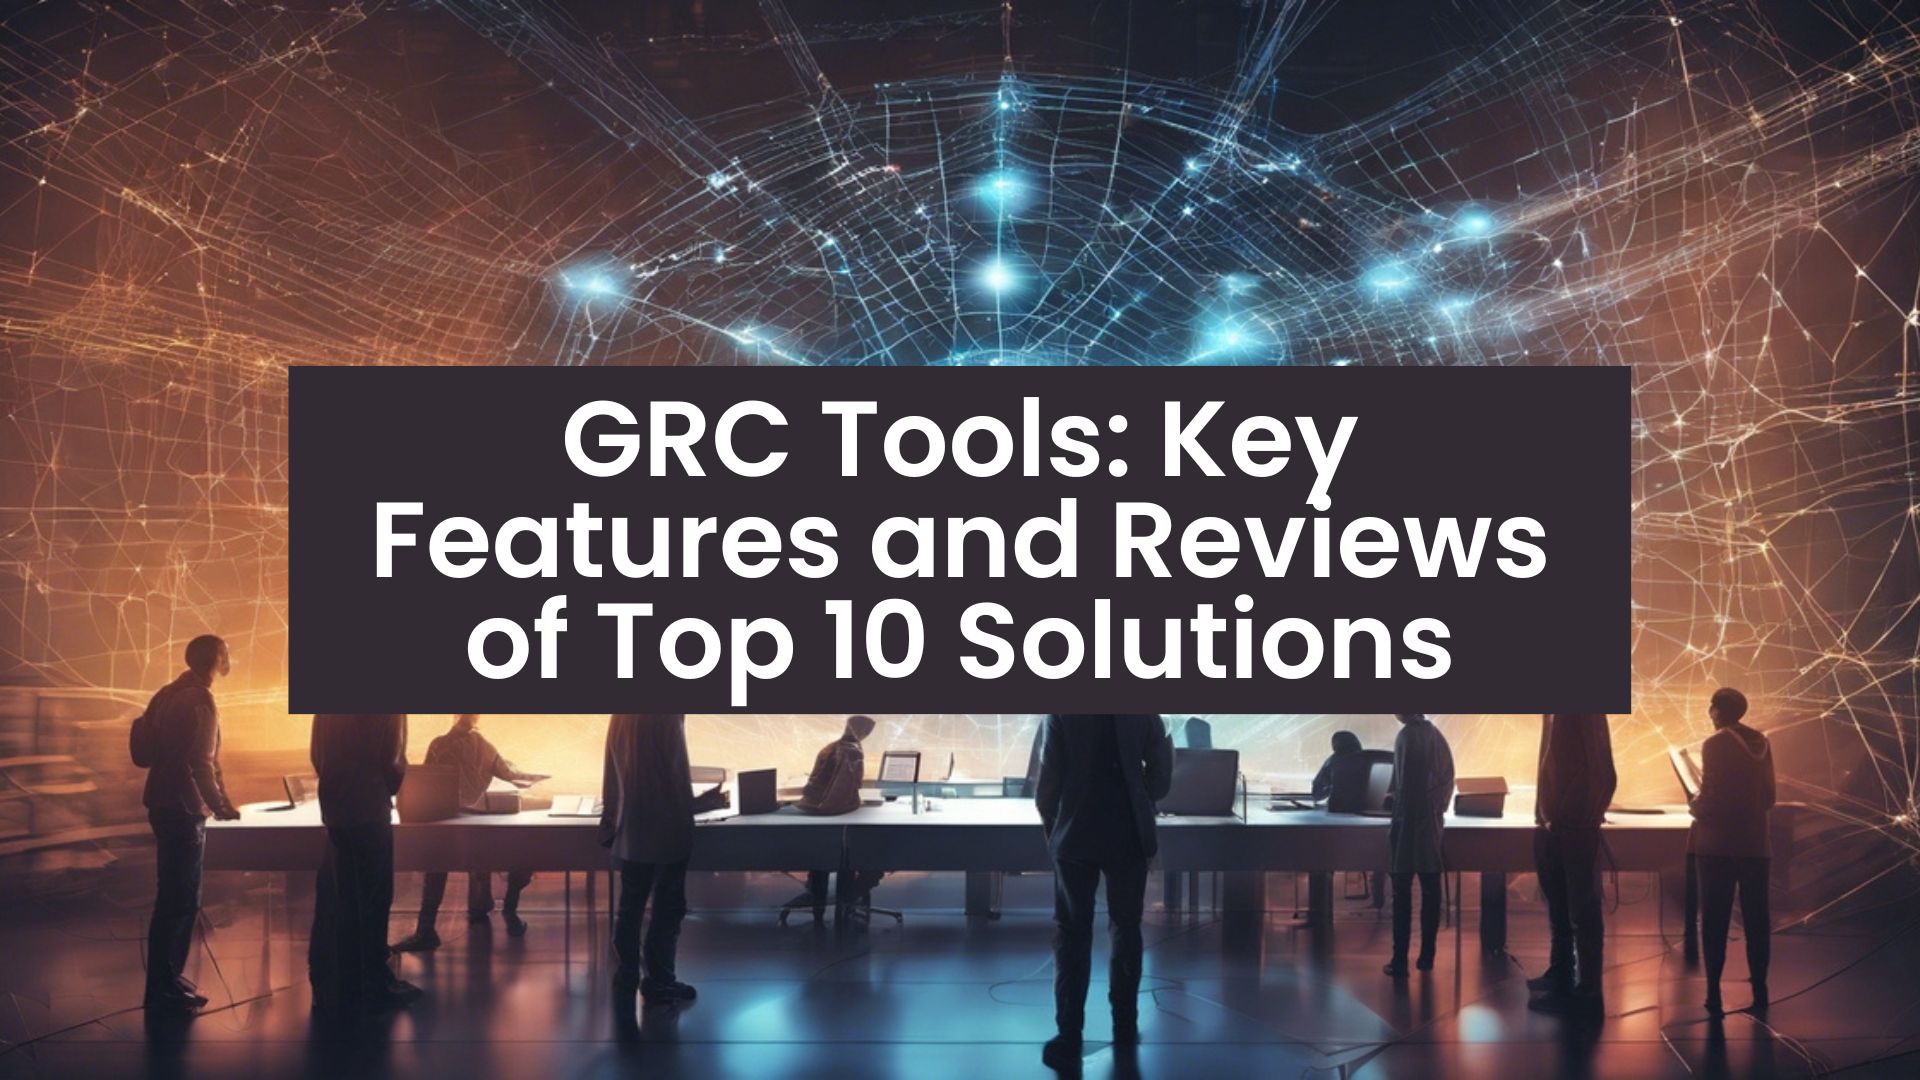 GRC Tools Key Features and Reviews of Top 10 Solutions